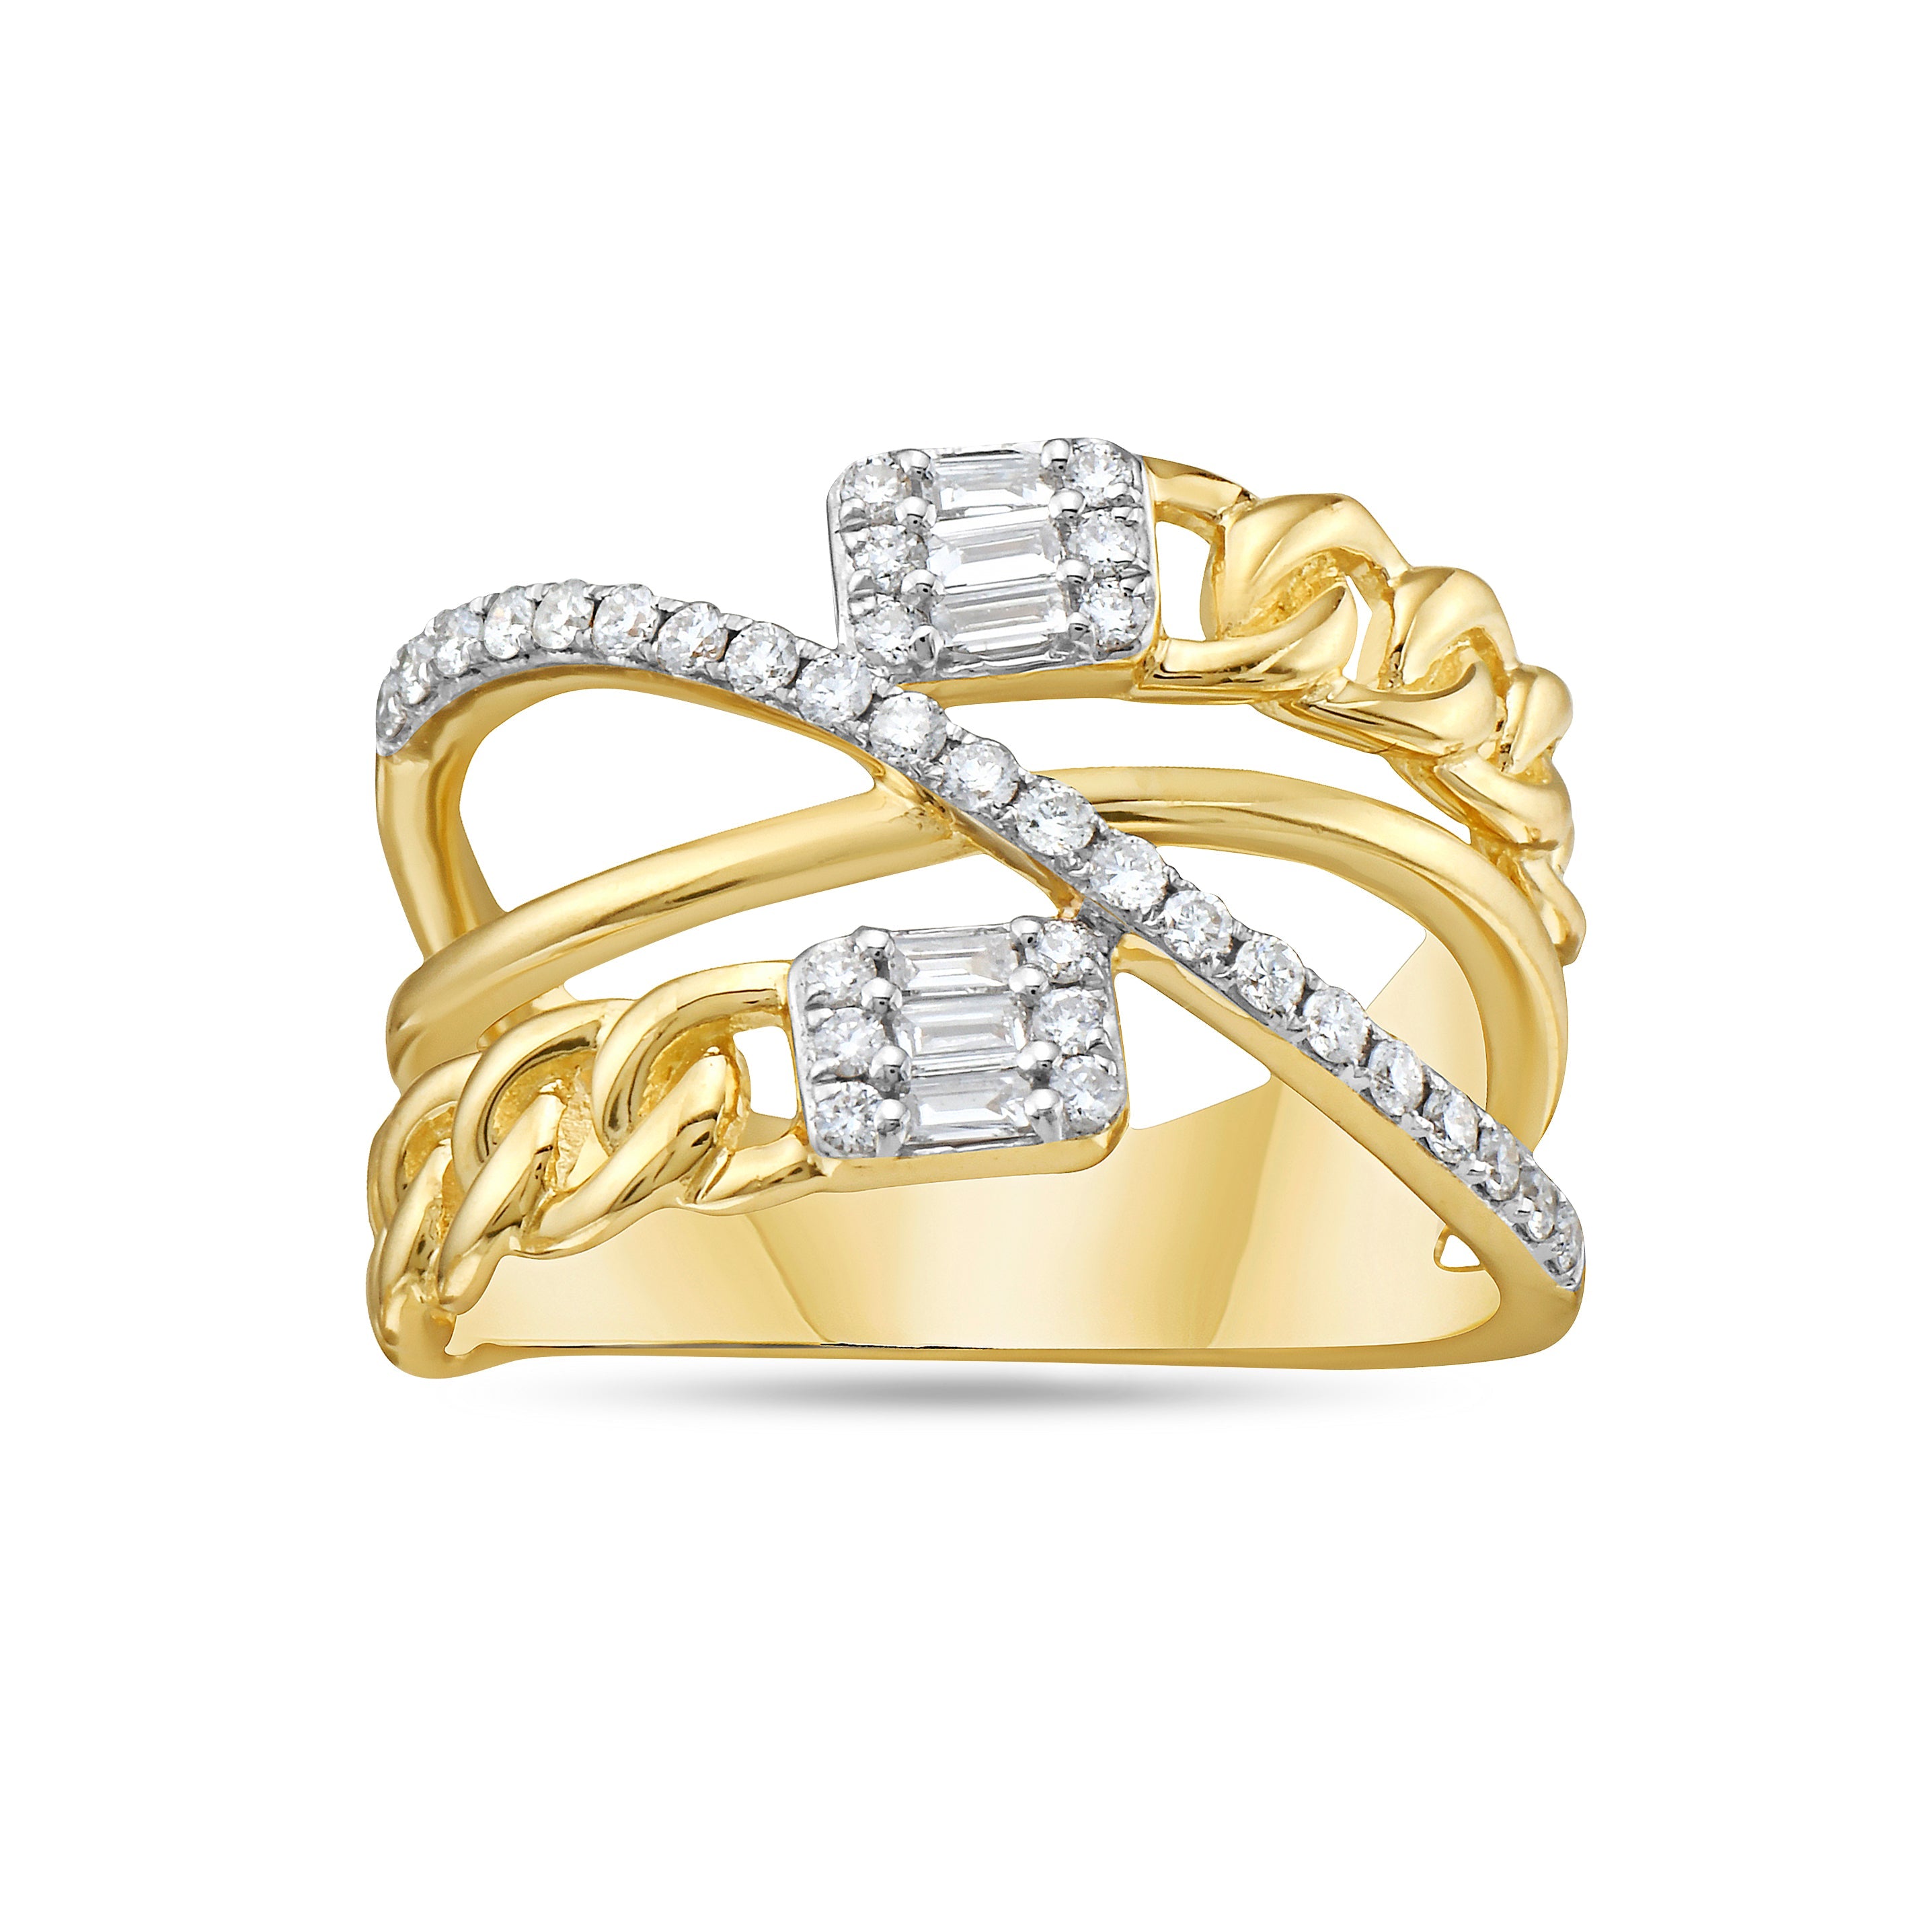 14K CHAIN LINK DESIGN RING WITH 6 BAGUETTE DIAMONDS 0.10CT & 33 ROUND DIAMONDS 0.28CT